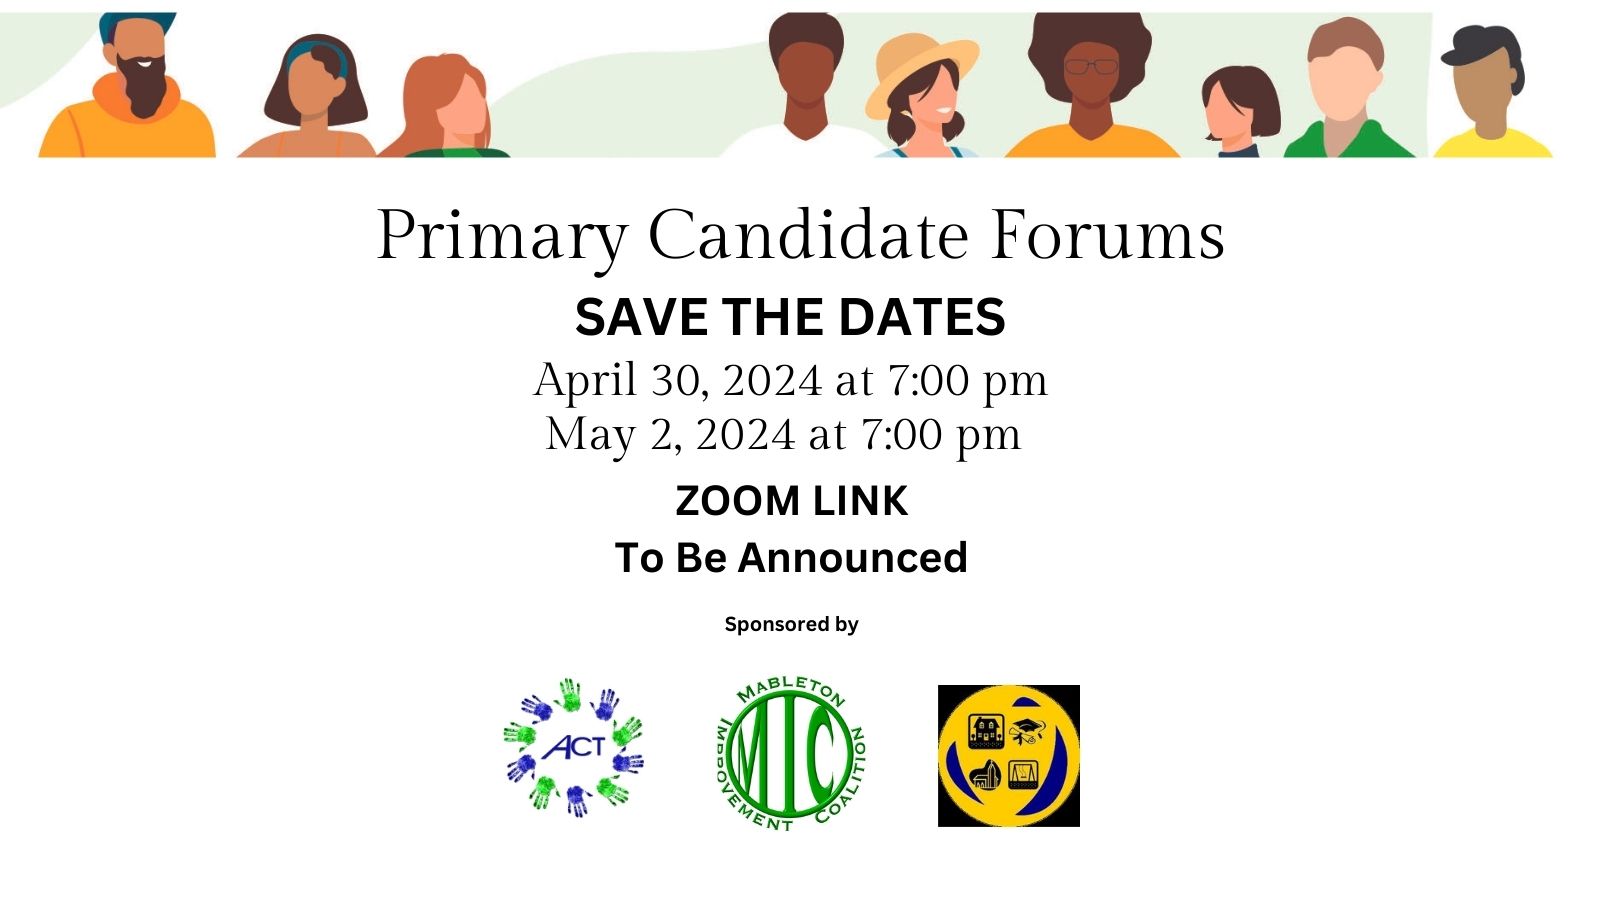 Primary Candidate Forums